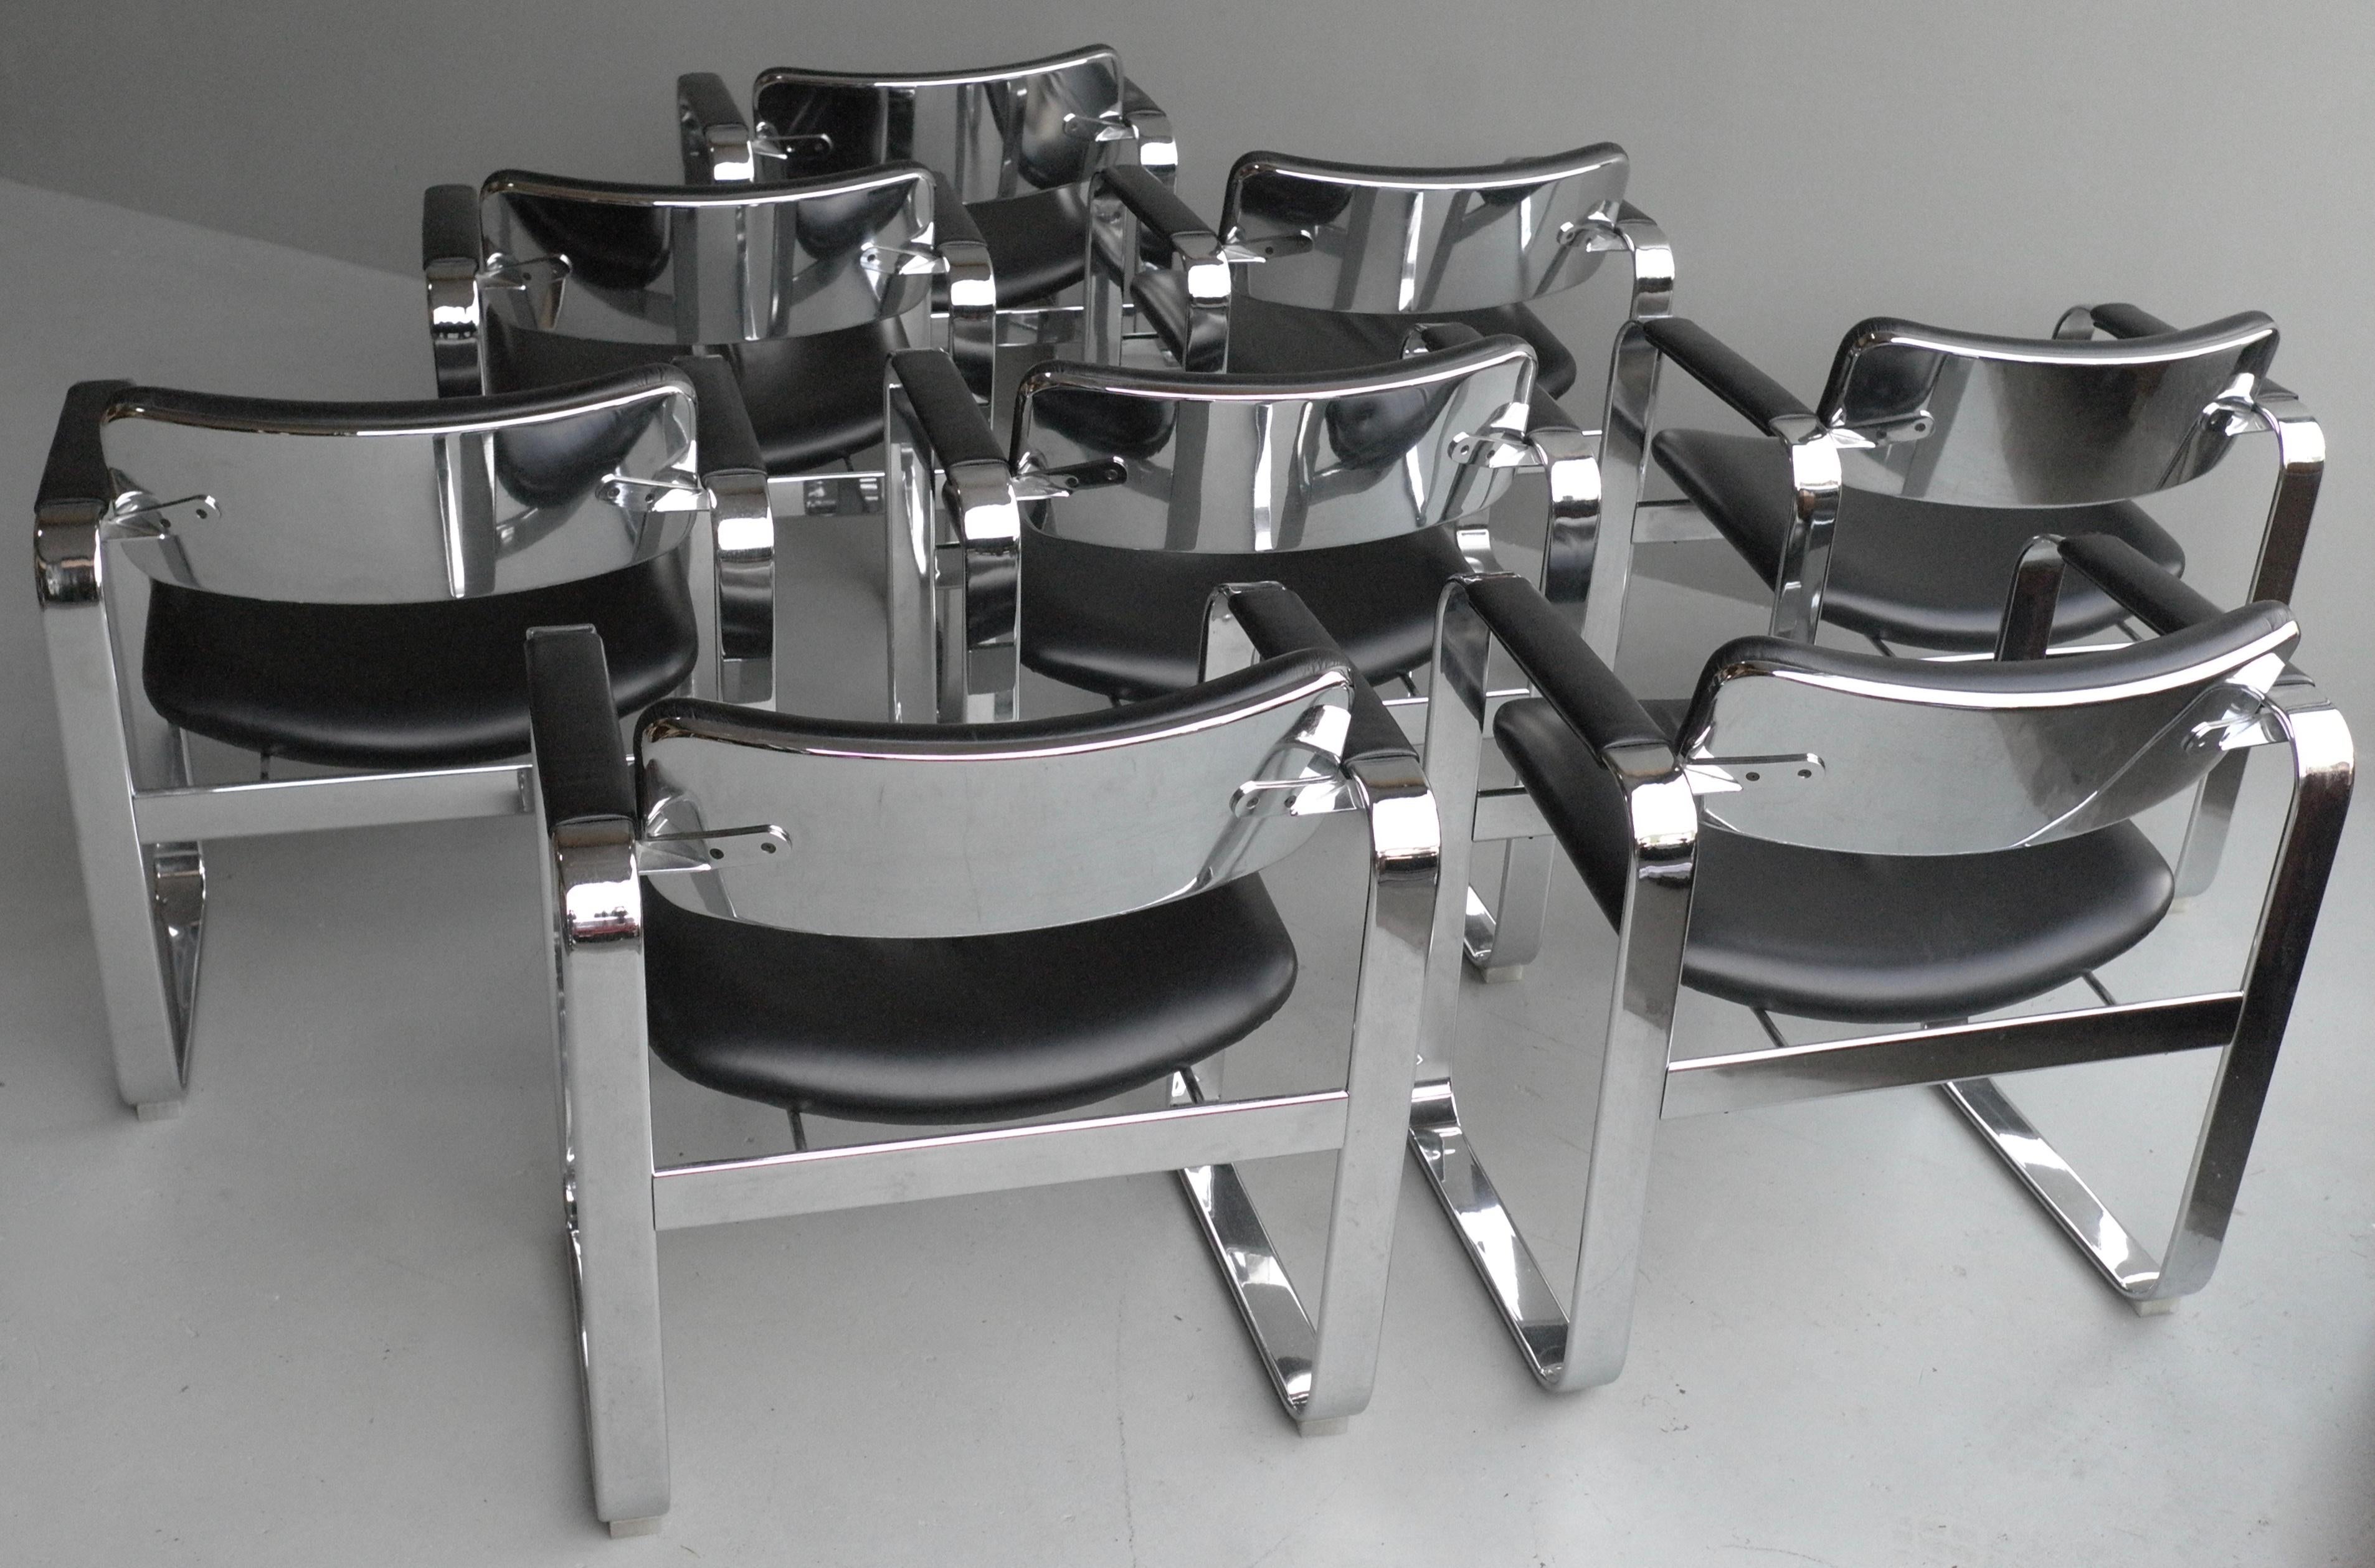 These executive chairs were designed by Eero Aarnio for Mobel Italia in 1968. They are made from faux black leather and chromed aluminium. These chairs shows a strong design with straight though friendly curved lines and meanwhile is very